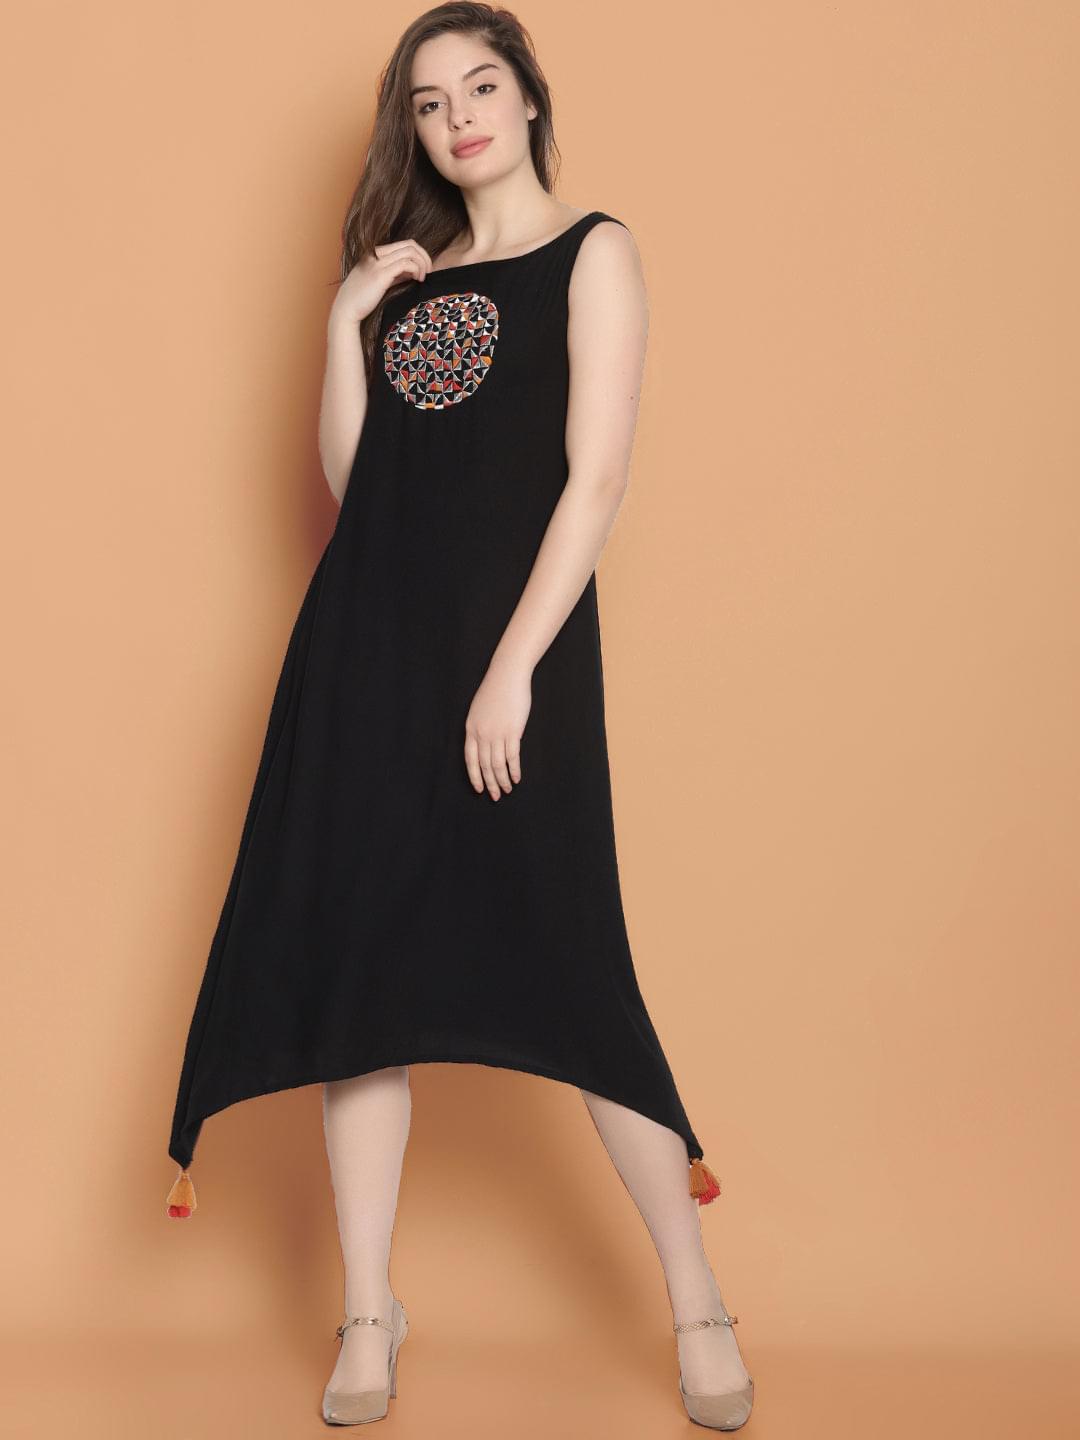 Black Embroidered Long Dress